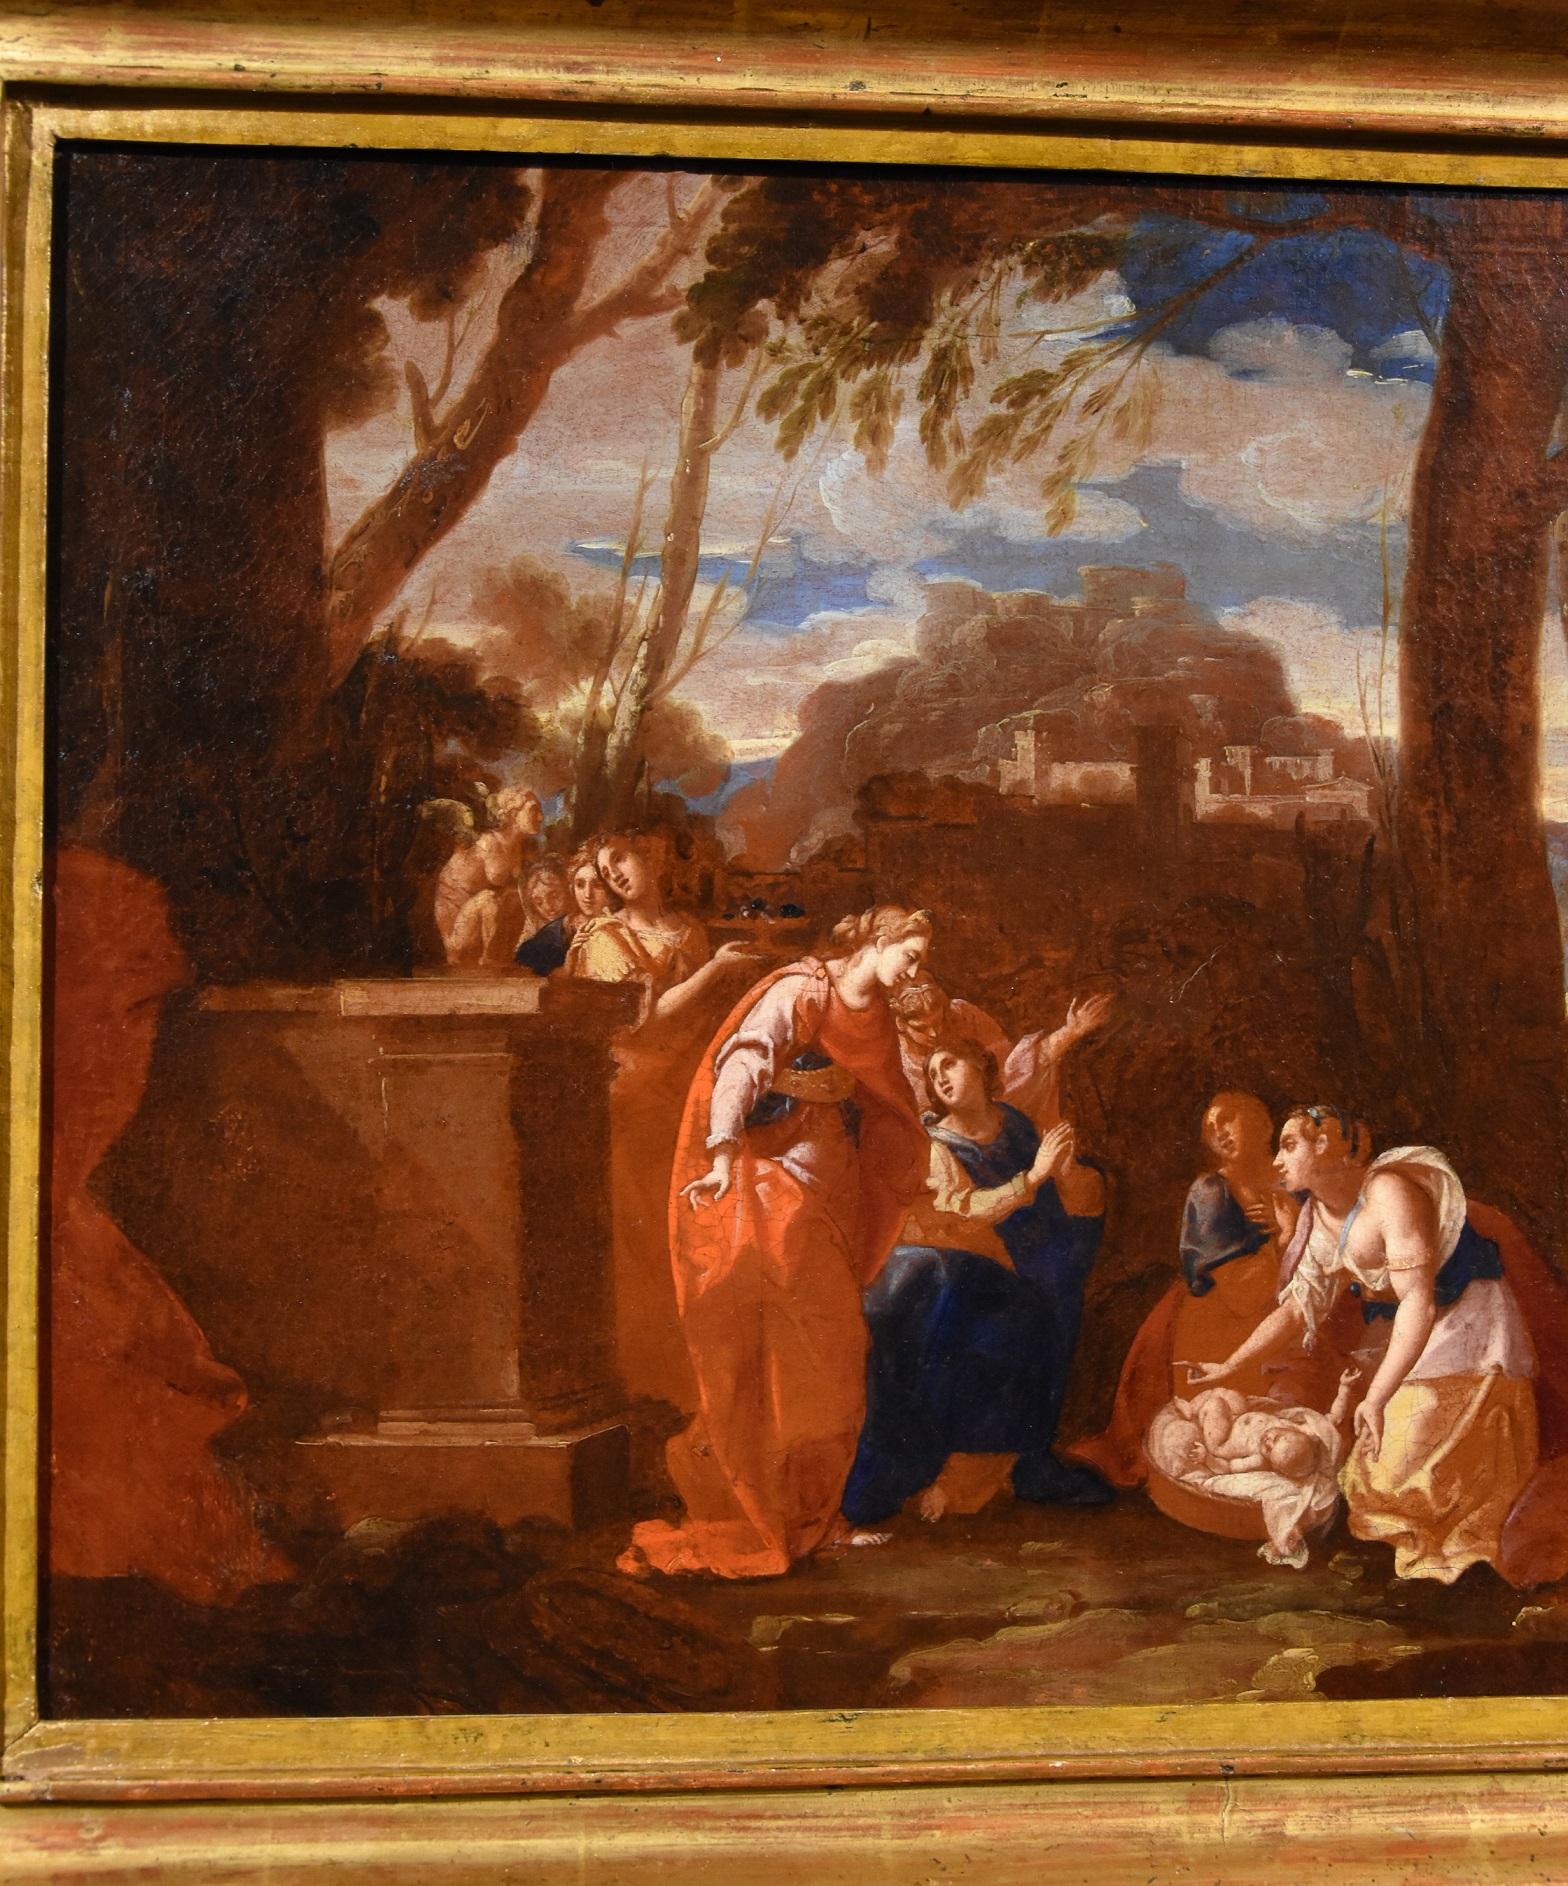 Nicolas Poussin (Les Andelys 1594 - Rome 1665) Workshop of
Little Moses found by Pharaoh's daughter

Oil painting on canvas
Measurements: canvas 45 x 59 cm.,
in frame 57 x 71 cm.

We present this splendid work representing the episode, taken from